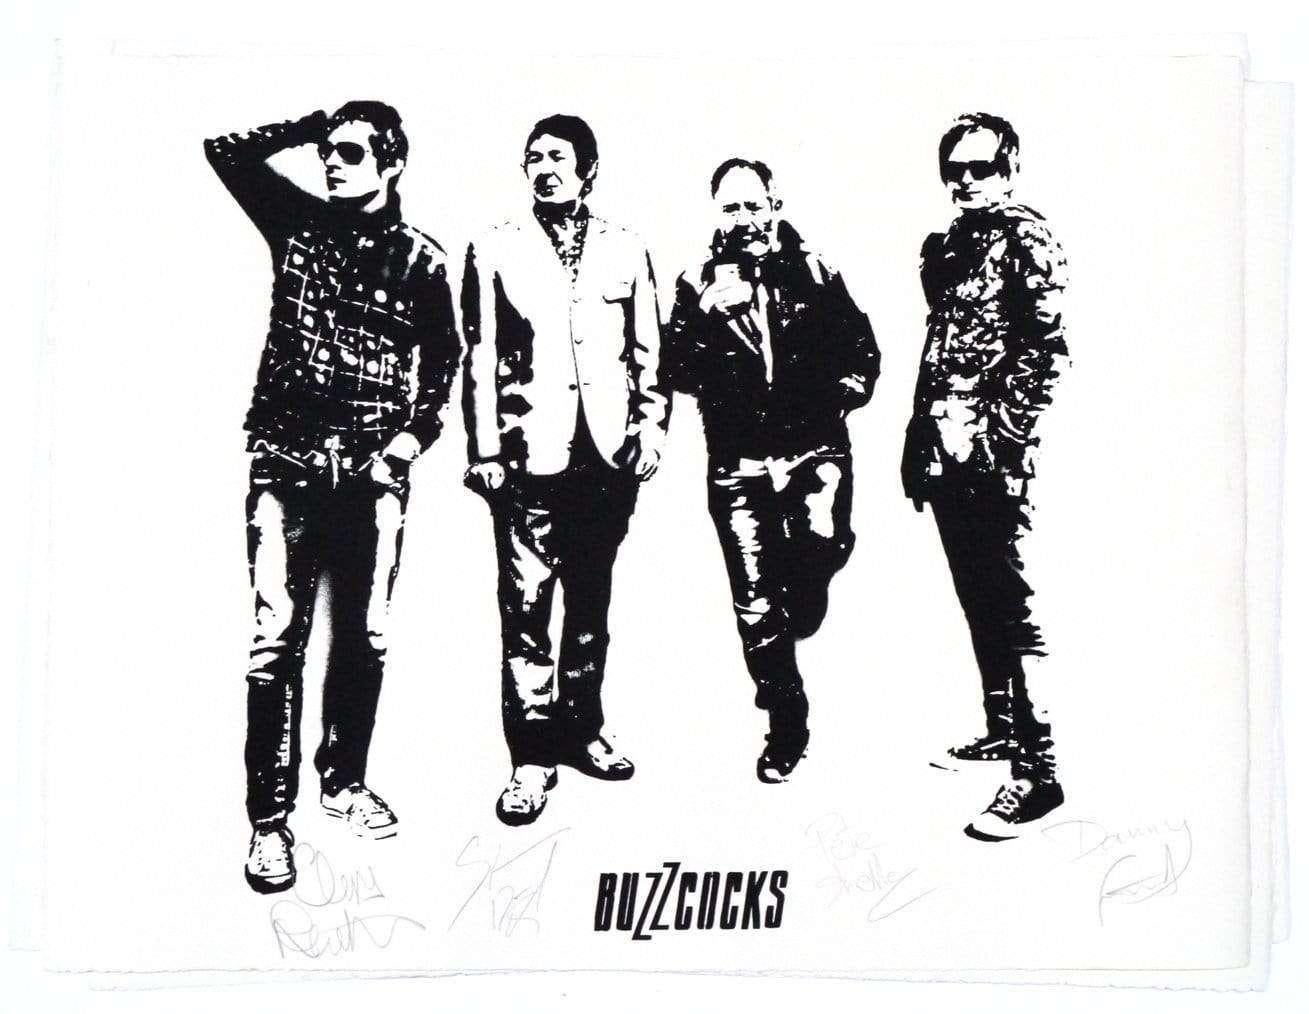 Buzzcocks - Print by The Dotmaster